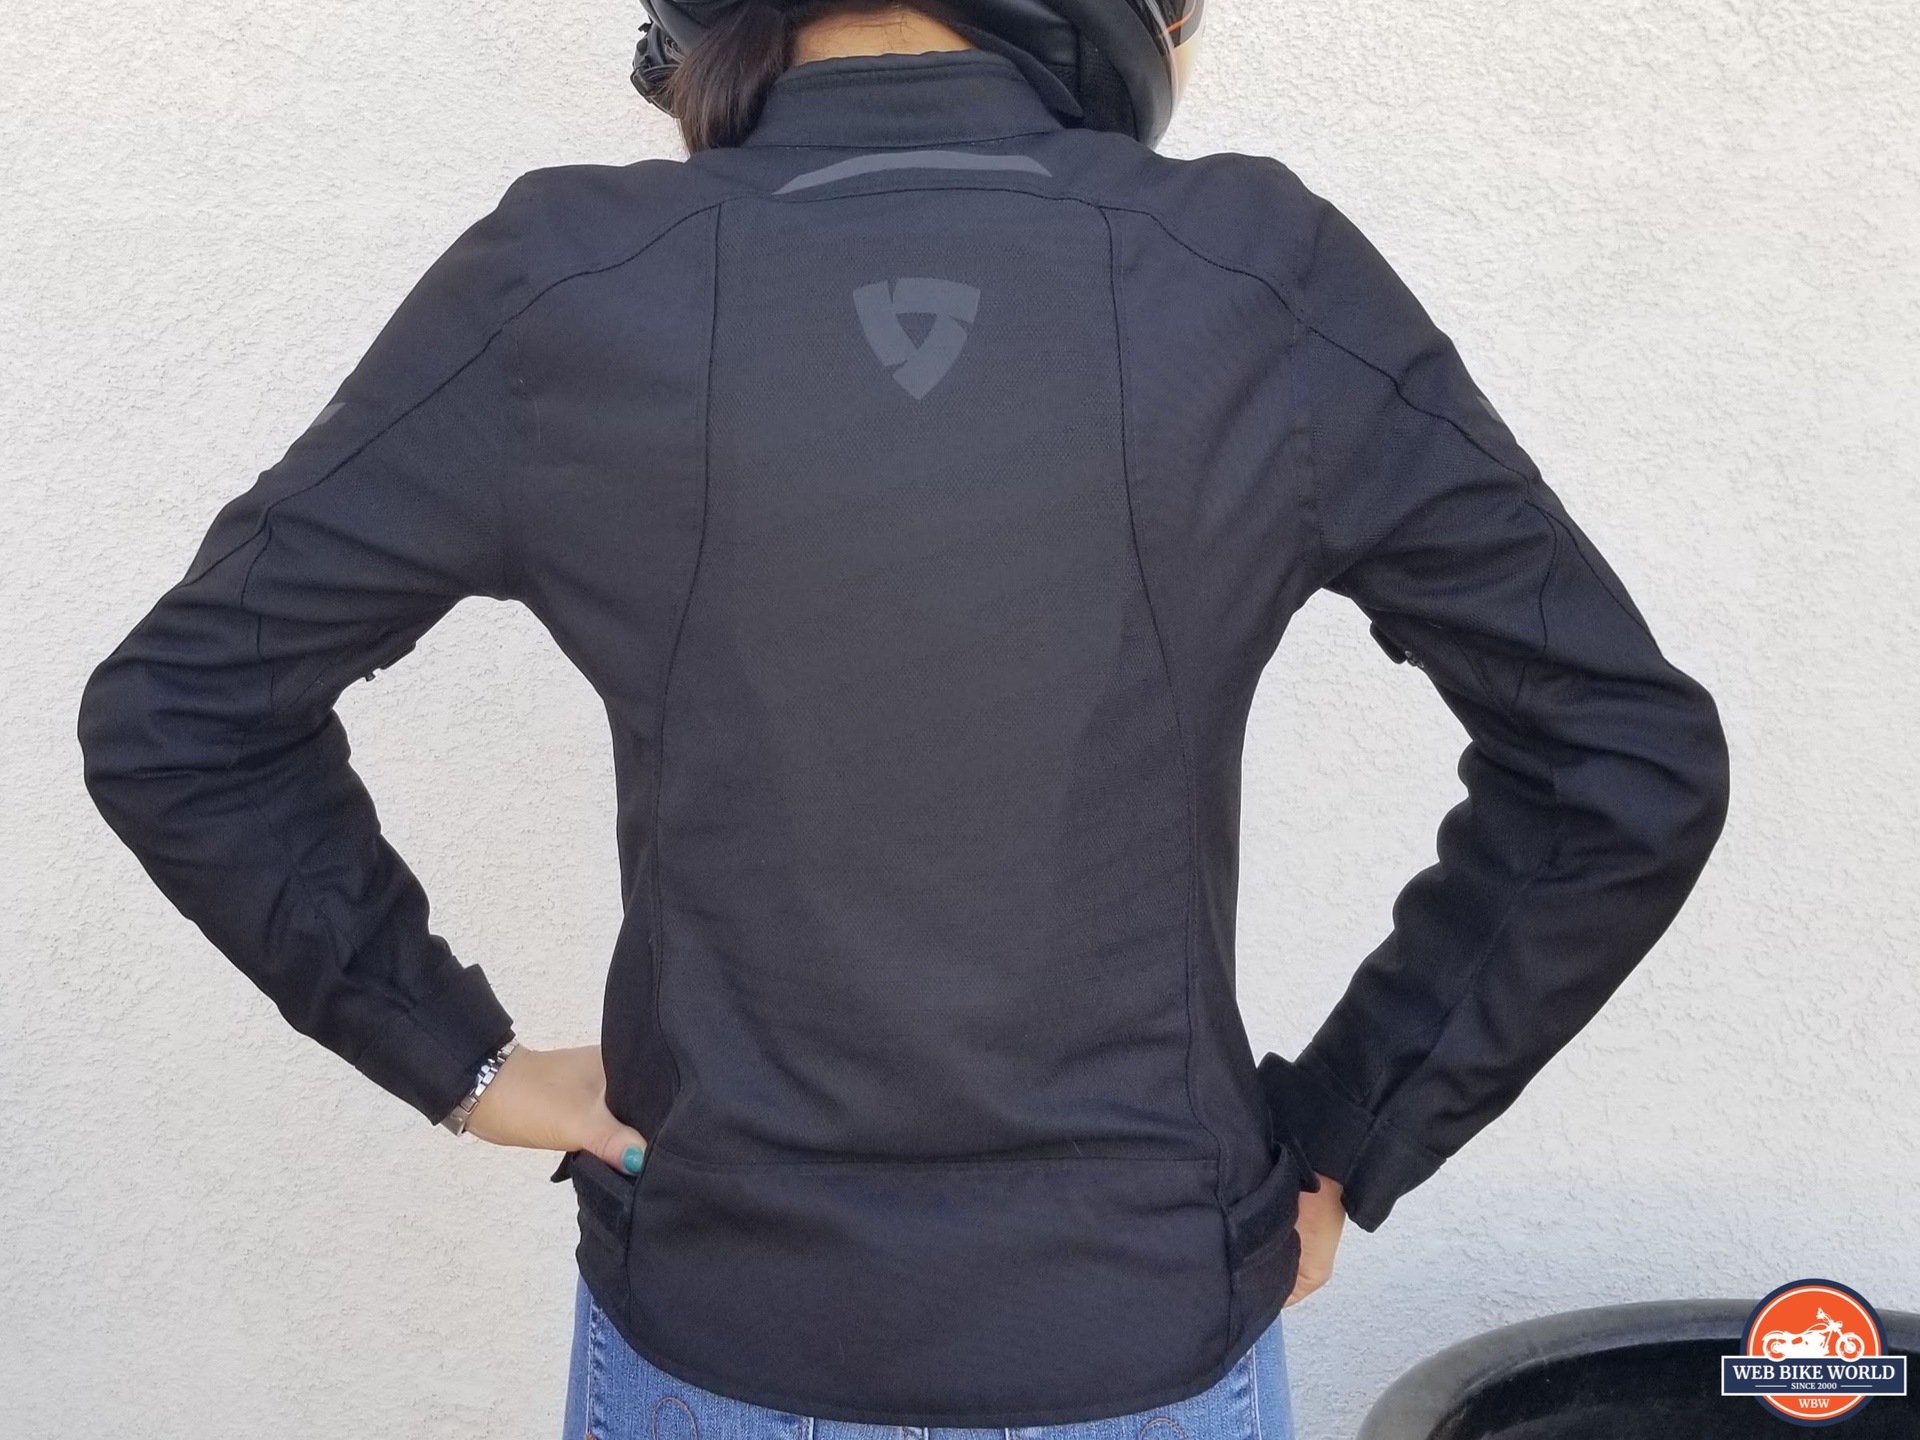 Rev'It! Torque 2 H2O Ladies Jacket with Back protector insert in.